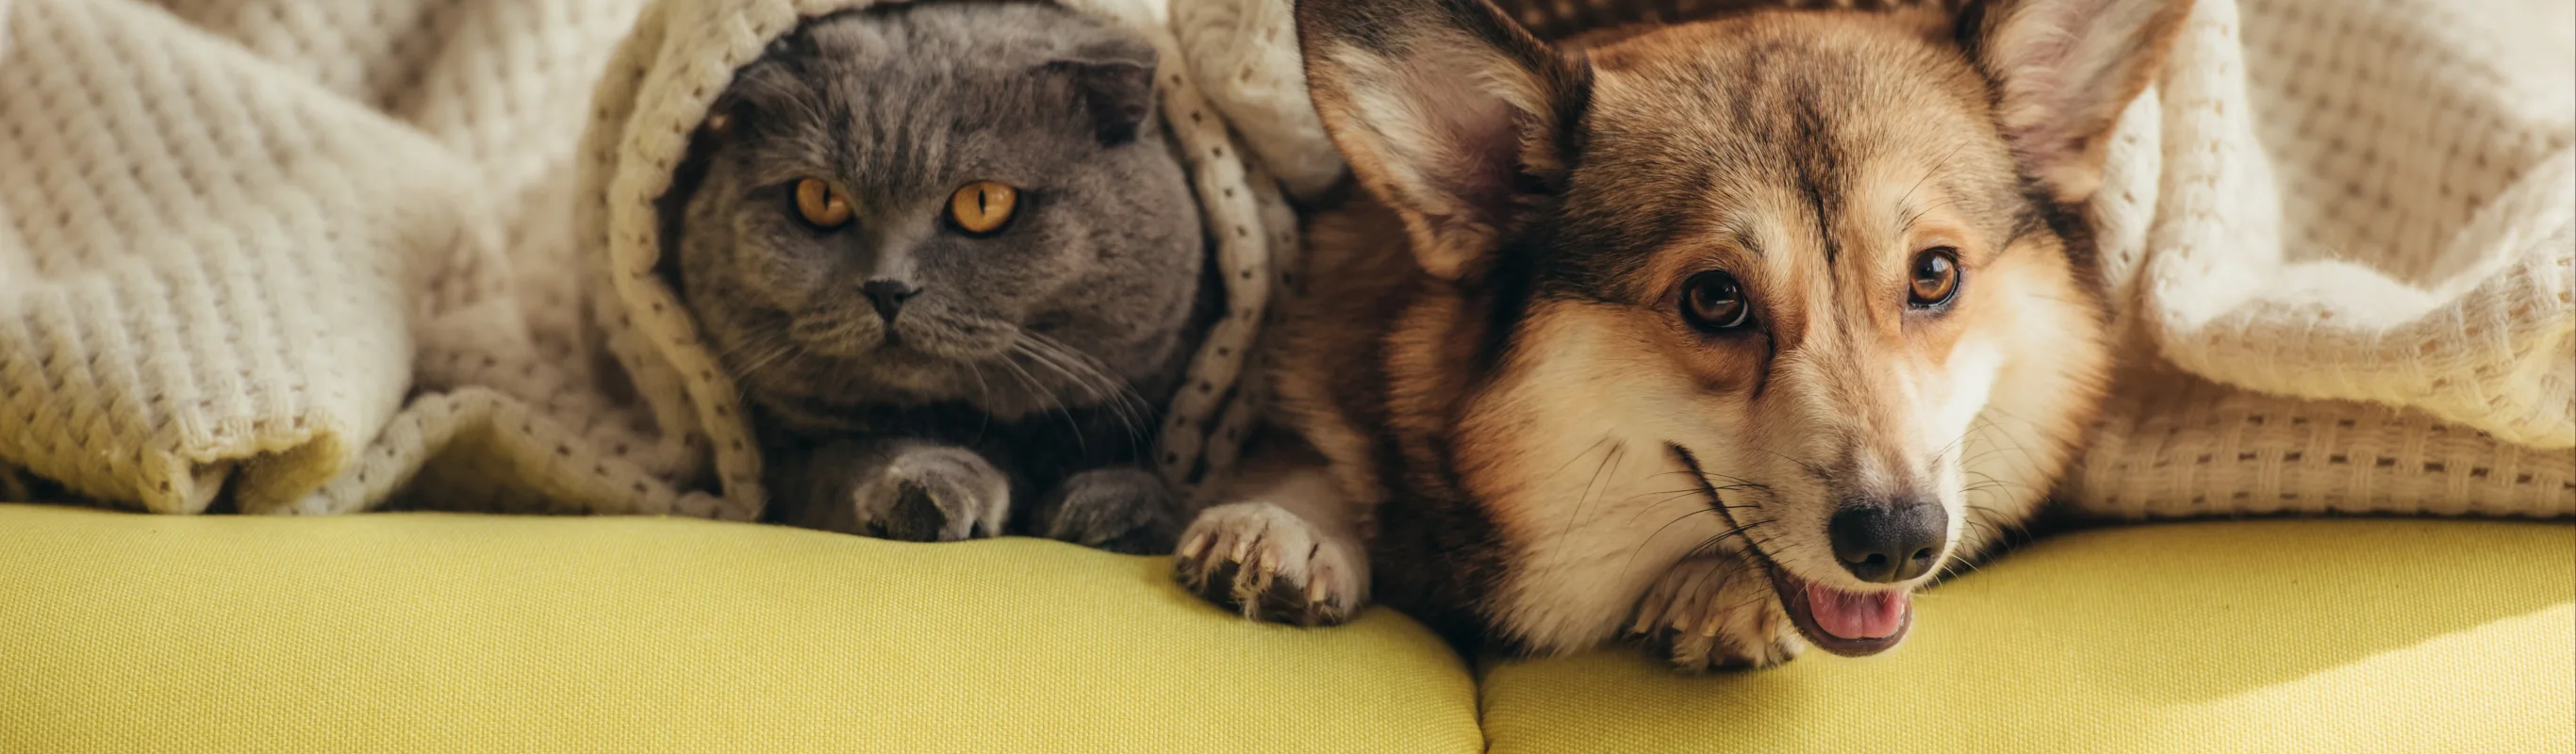 corgi and cat on a couch with blanket